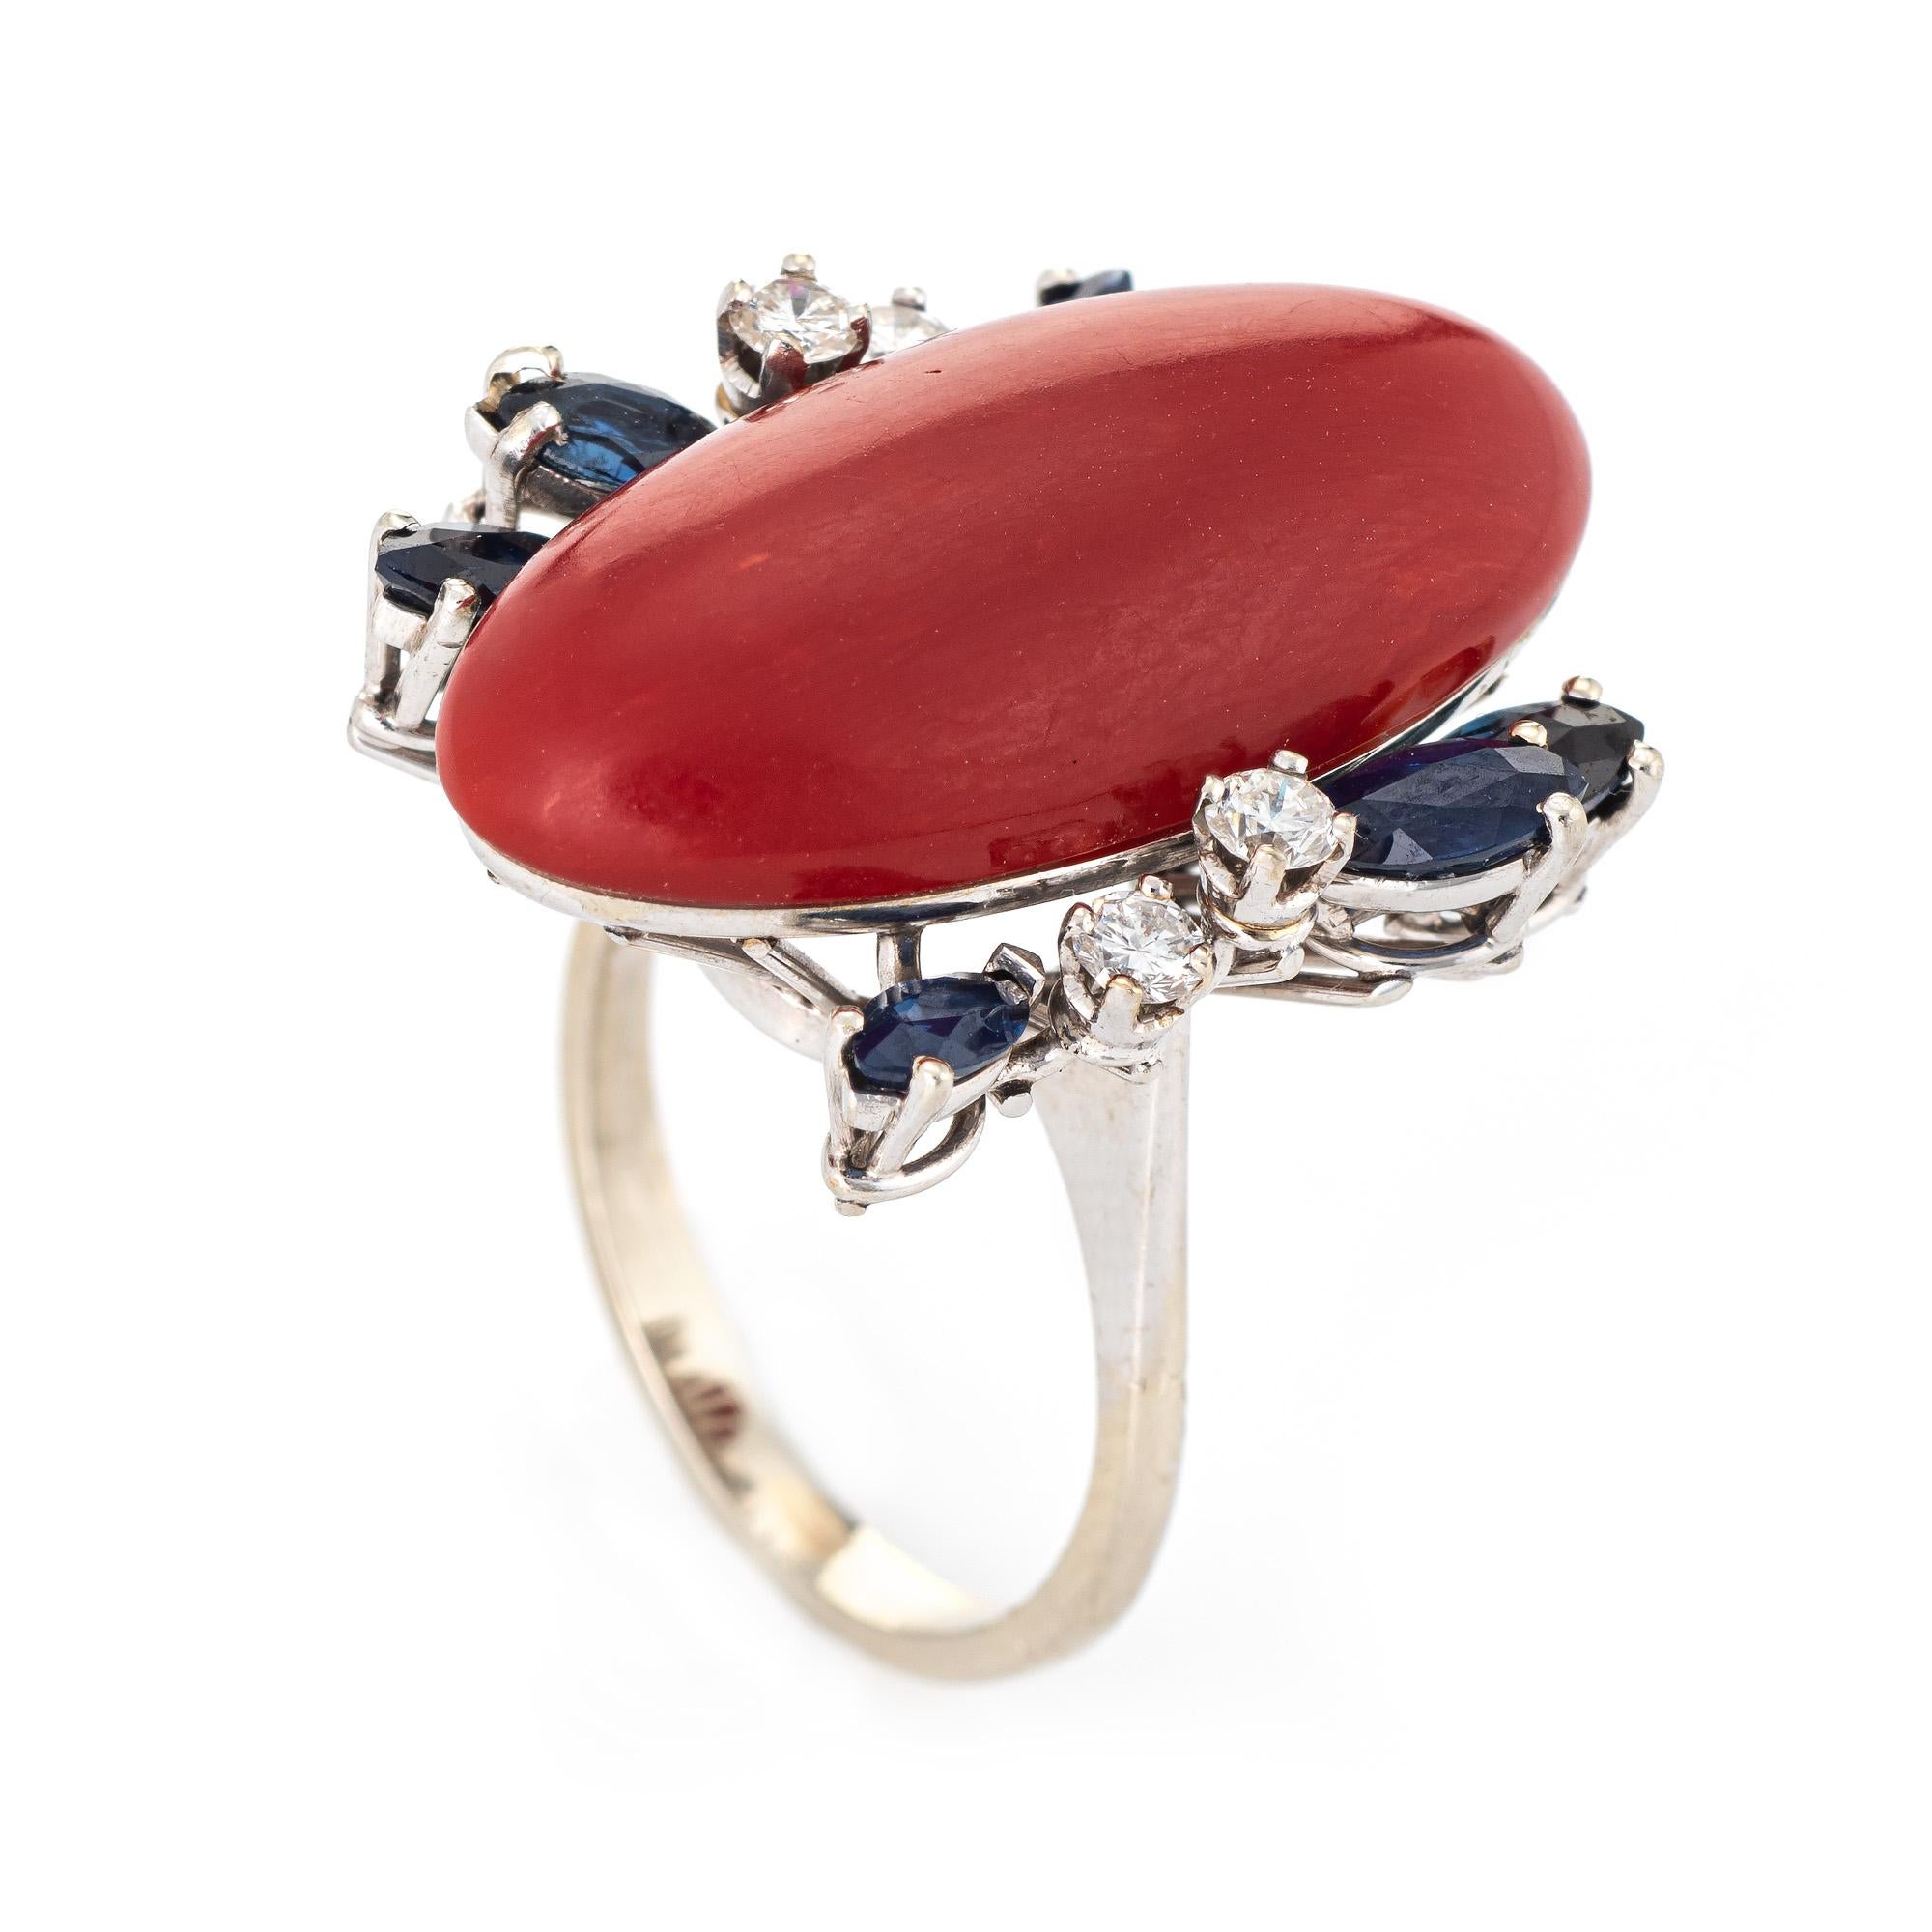 Stylish vintage Sardinian red coral, sapphire & diamond cocktail ring (circa 1950s to 1960s) crafted in 18 karat white gold. 

Sardinian red coral measures 26mm x 12mm (estimated at 10 carats) is accented with 6 estimated 0.10 carats blue sapphires